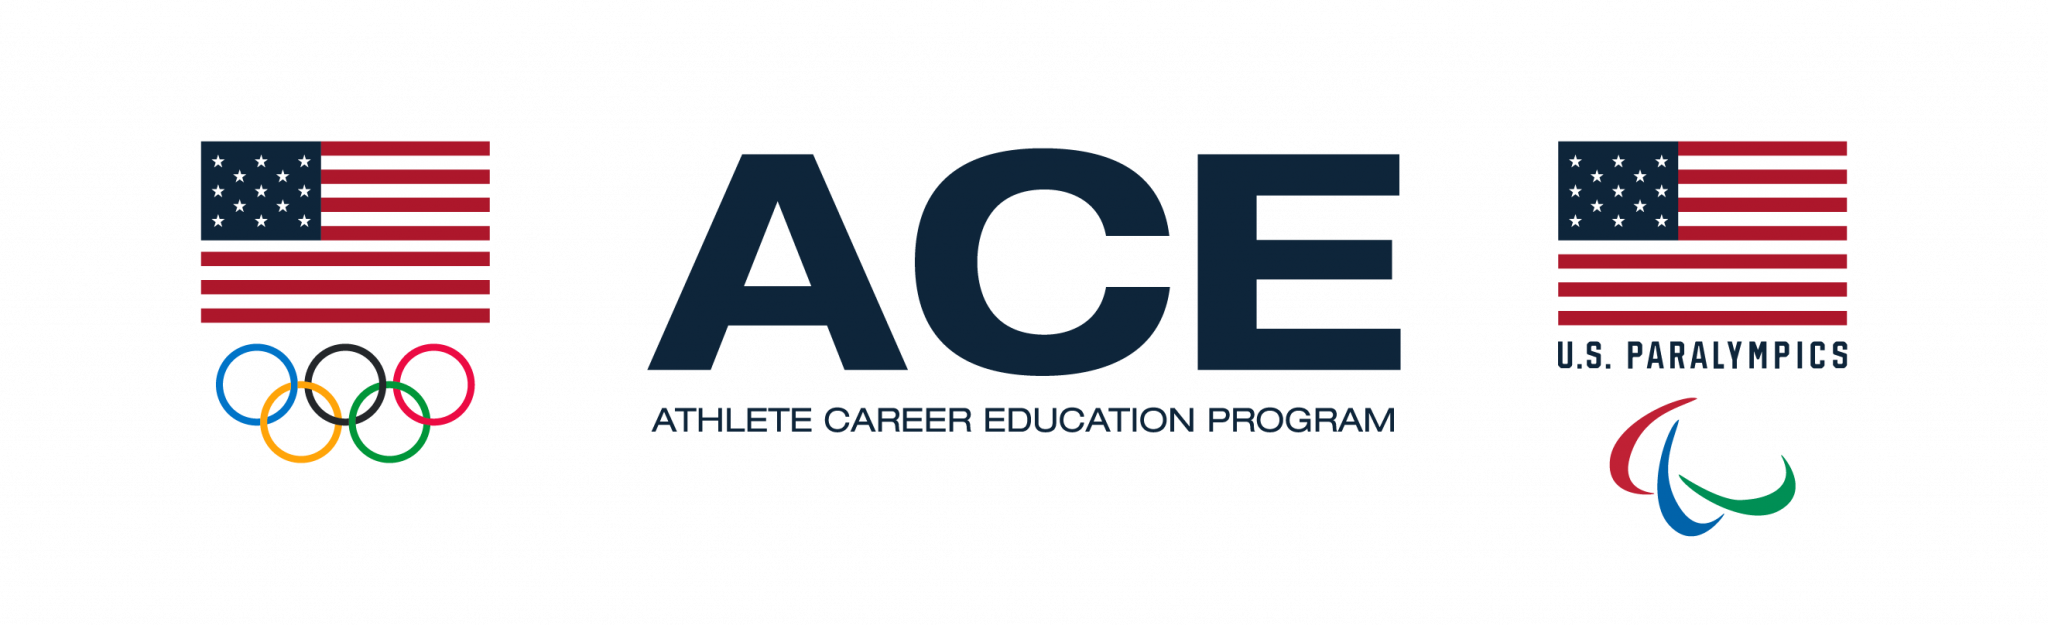 The Athlete Career and Education programme aims to help athletes explore career and education options ©USOC